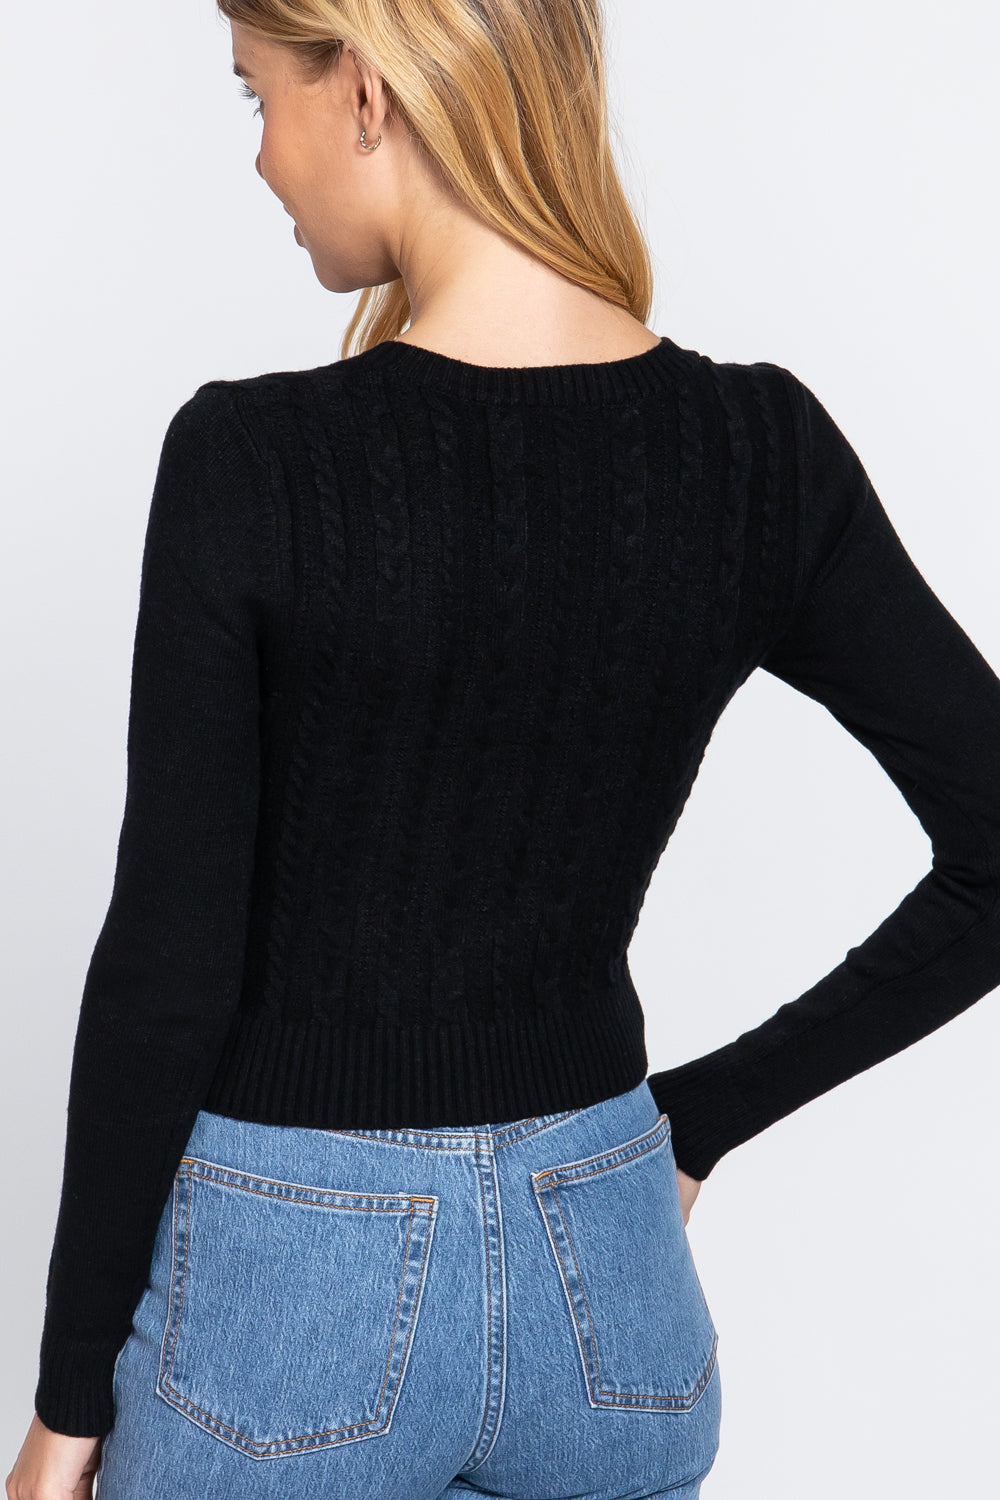 Women's Long Sleeve V-neck Cable Sweater